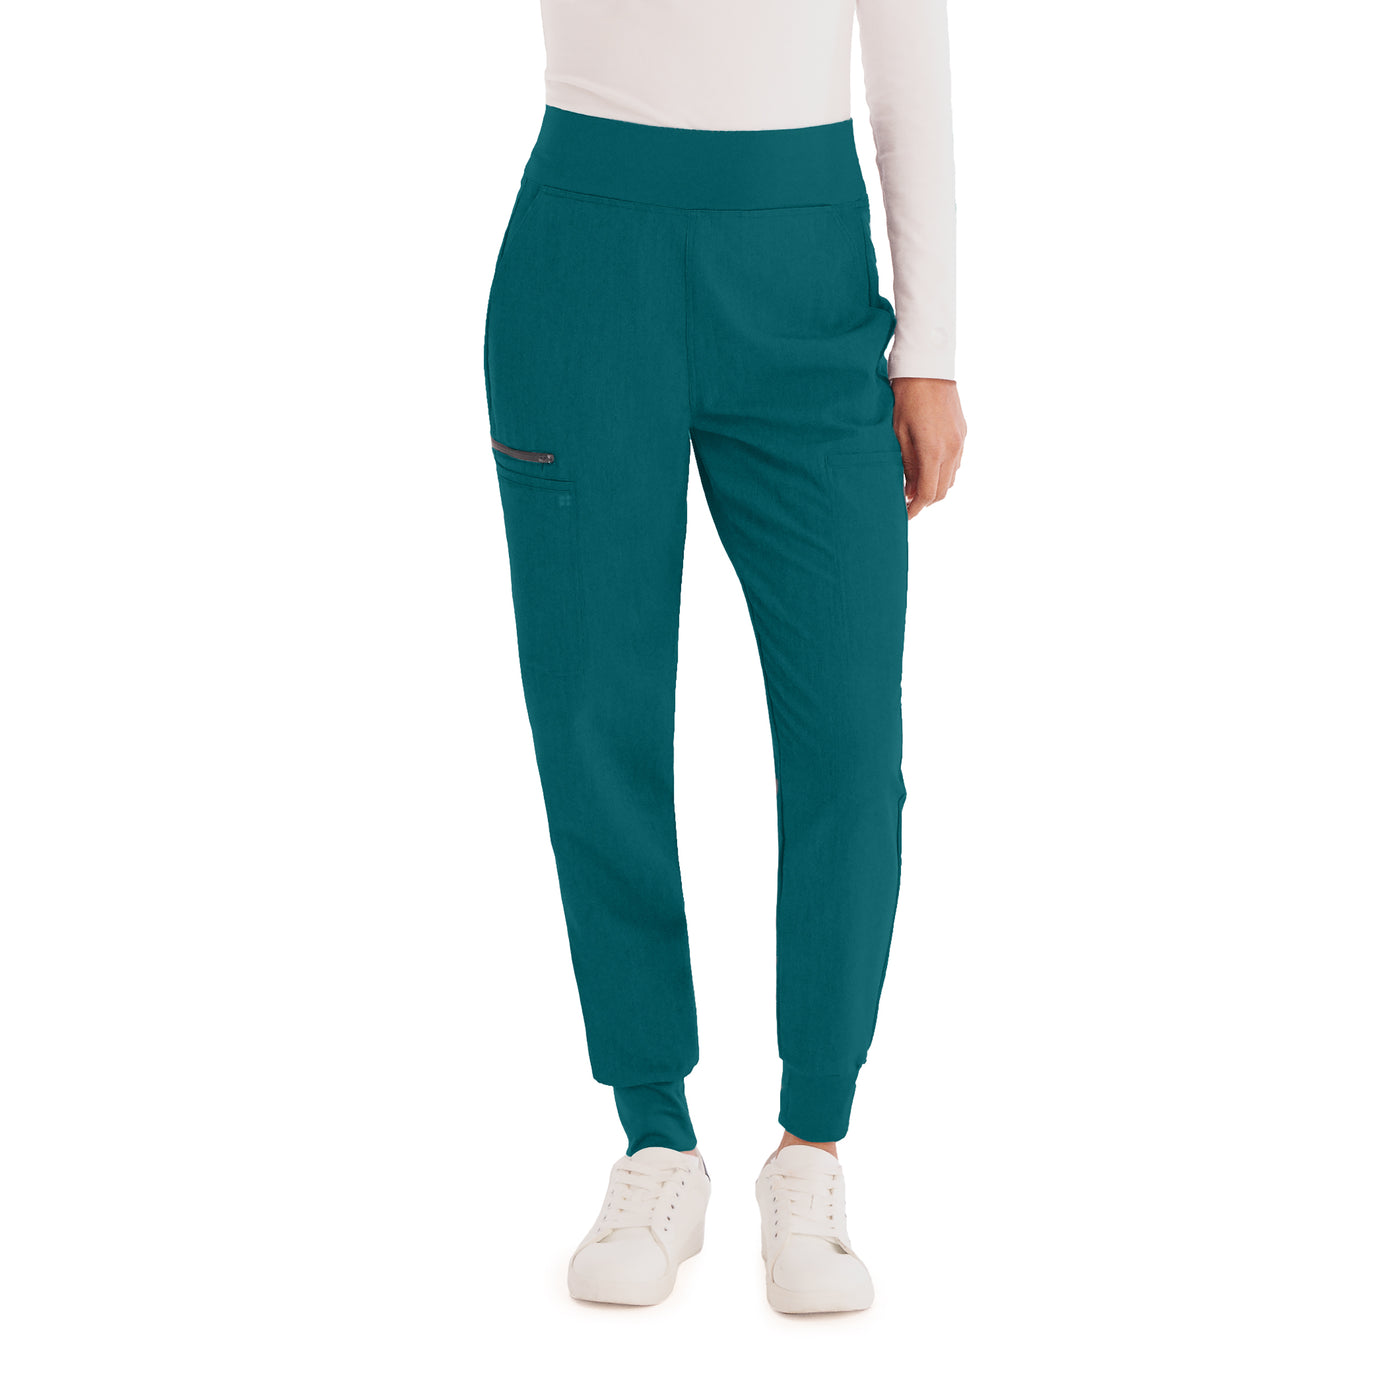 Caribbean - White Cross V-Tess Jogger with Jersey Knit Contrast